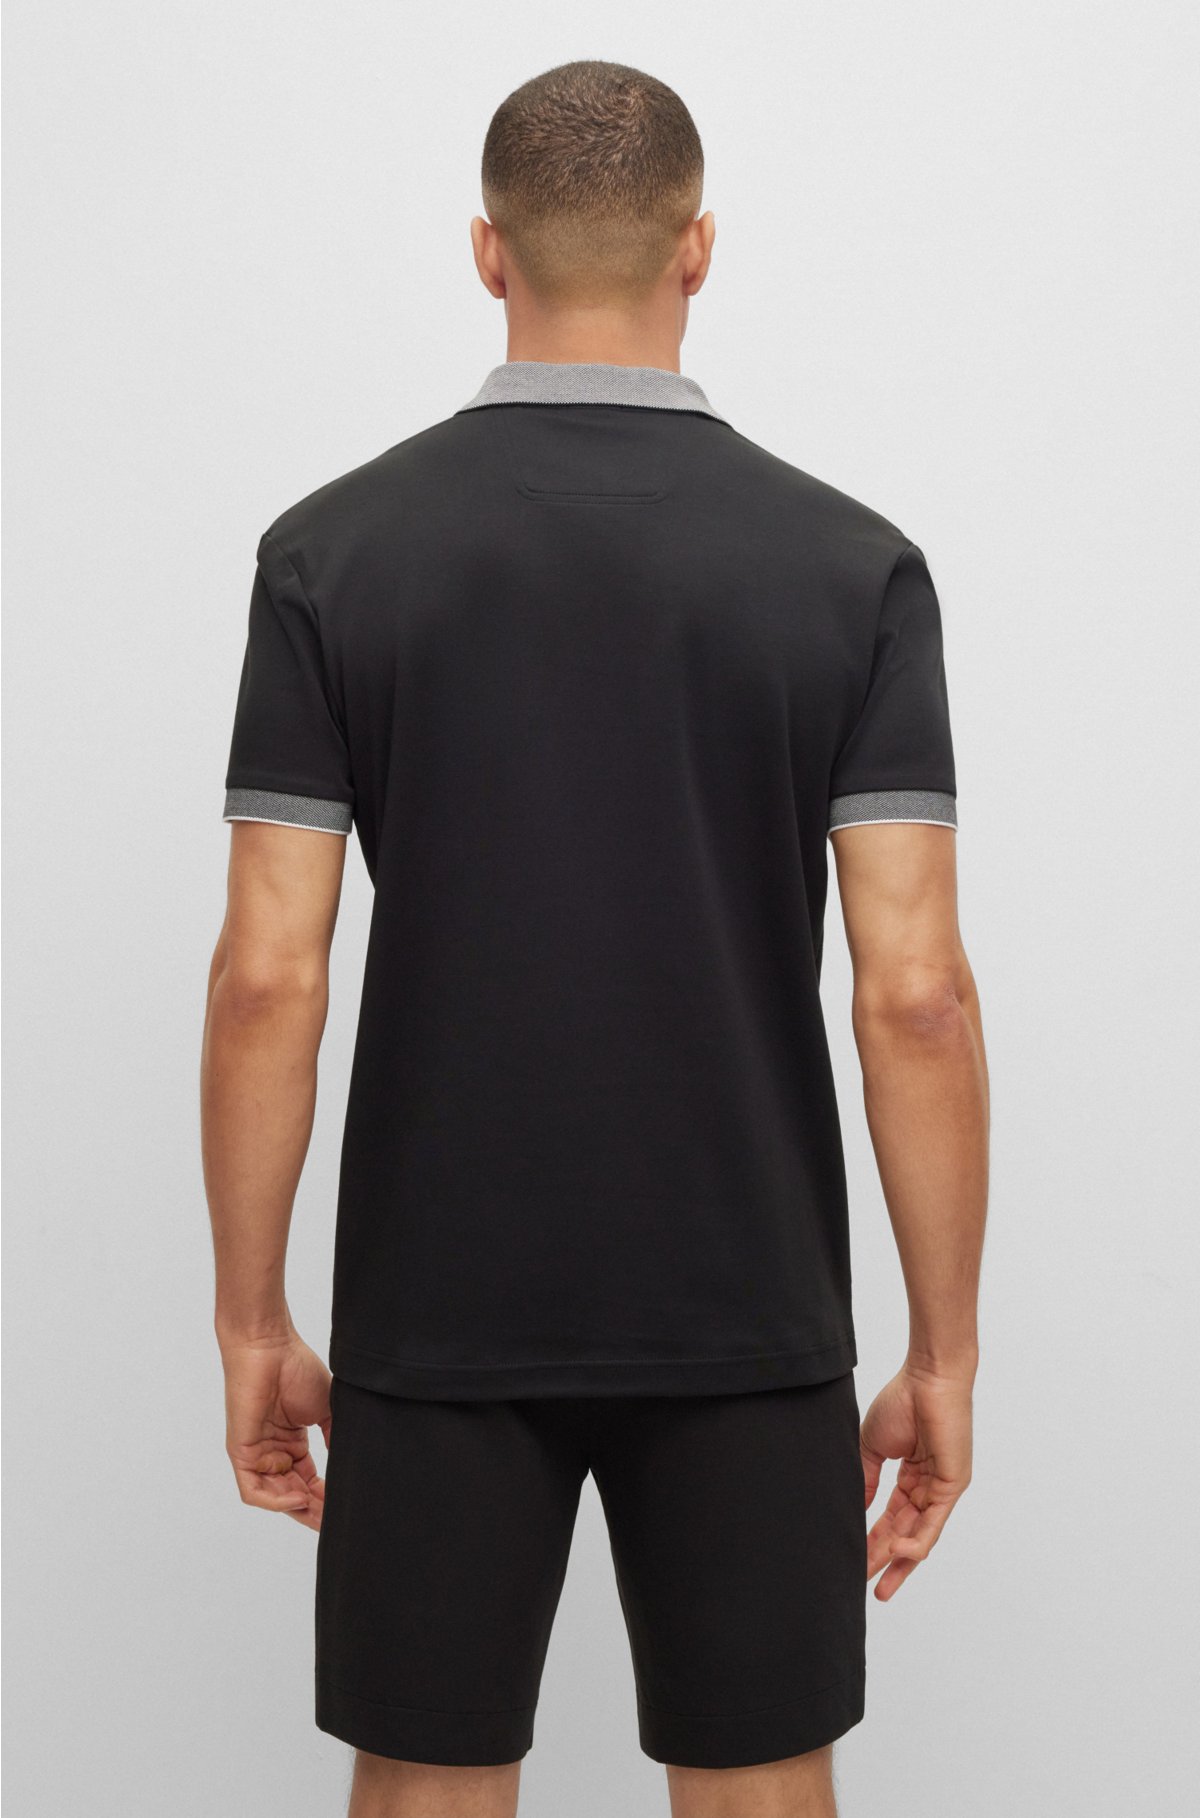 Interlock-cotton polo shirt with structured collar and logo, Black